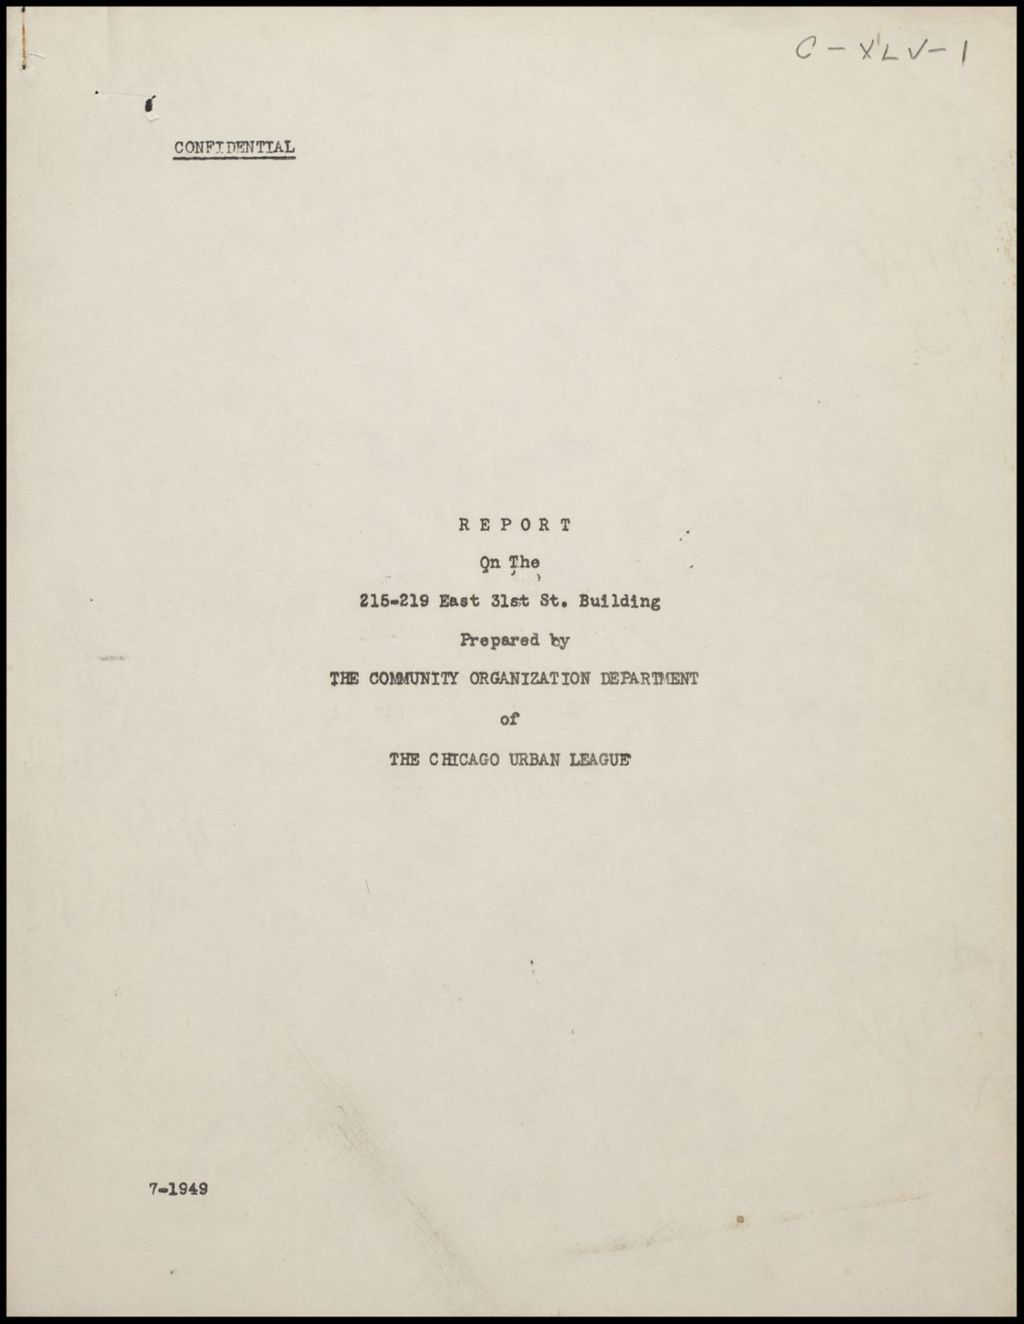 Reports Received, 1952-1954 (Folder III-2449)